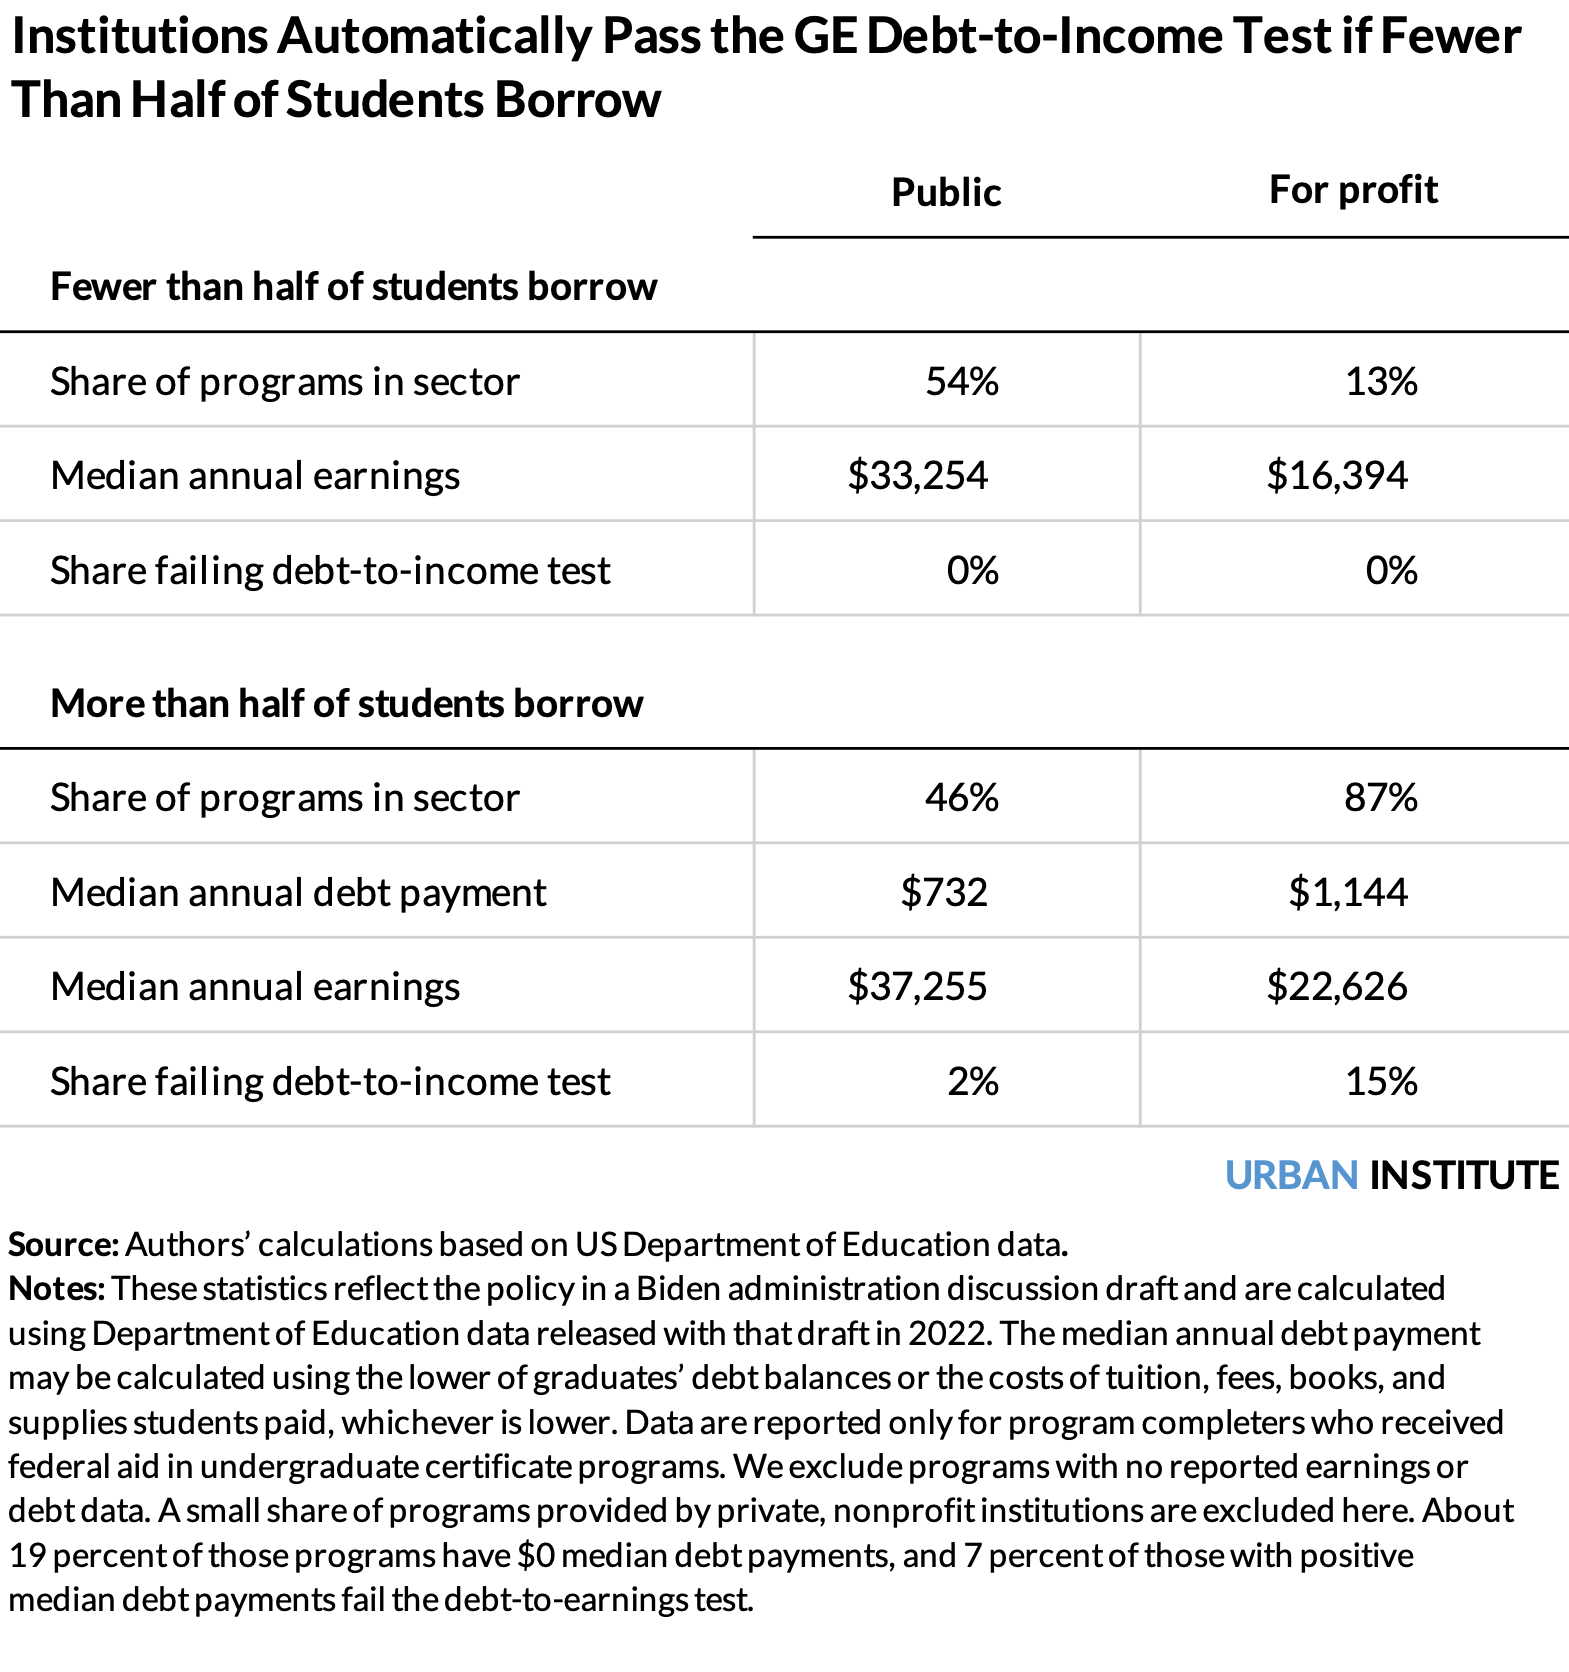 A table showing the institutions that would automatically pass the gainful employment rule’s debt-to-income test if fewer than half of students borrowed loans.